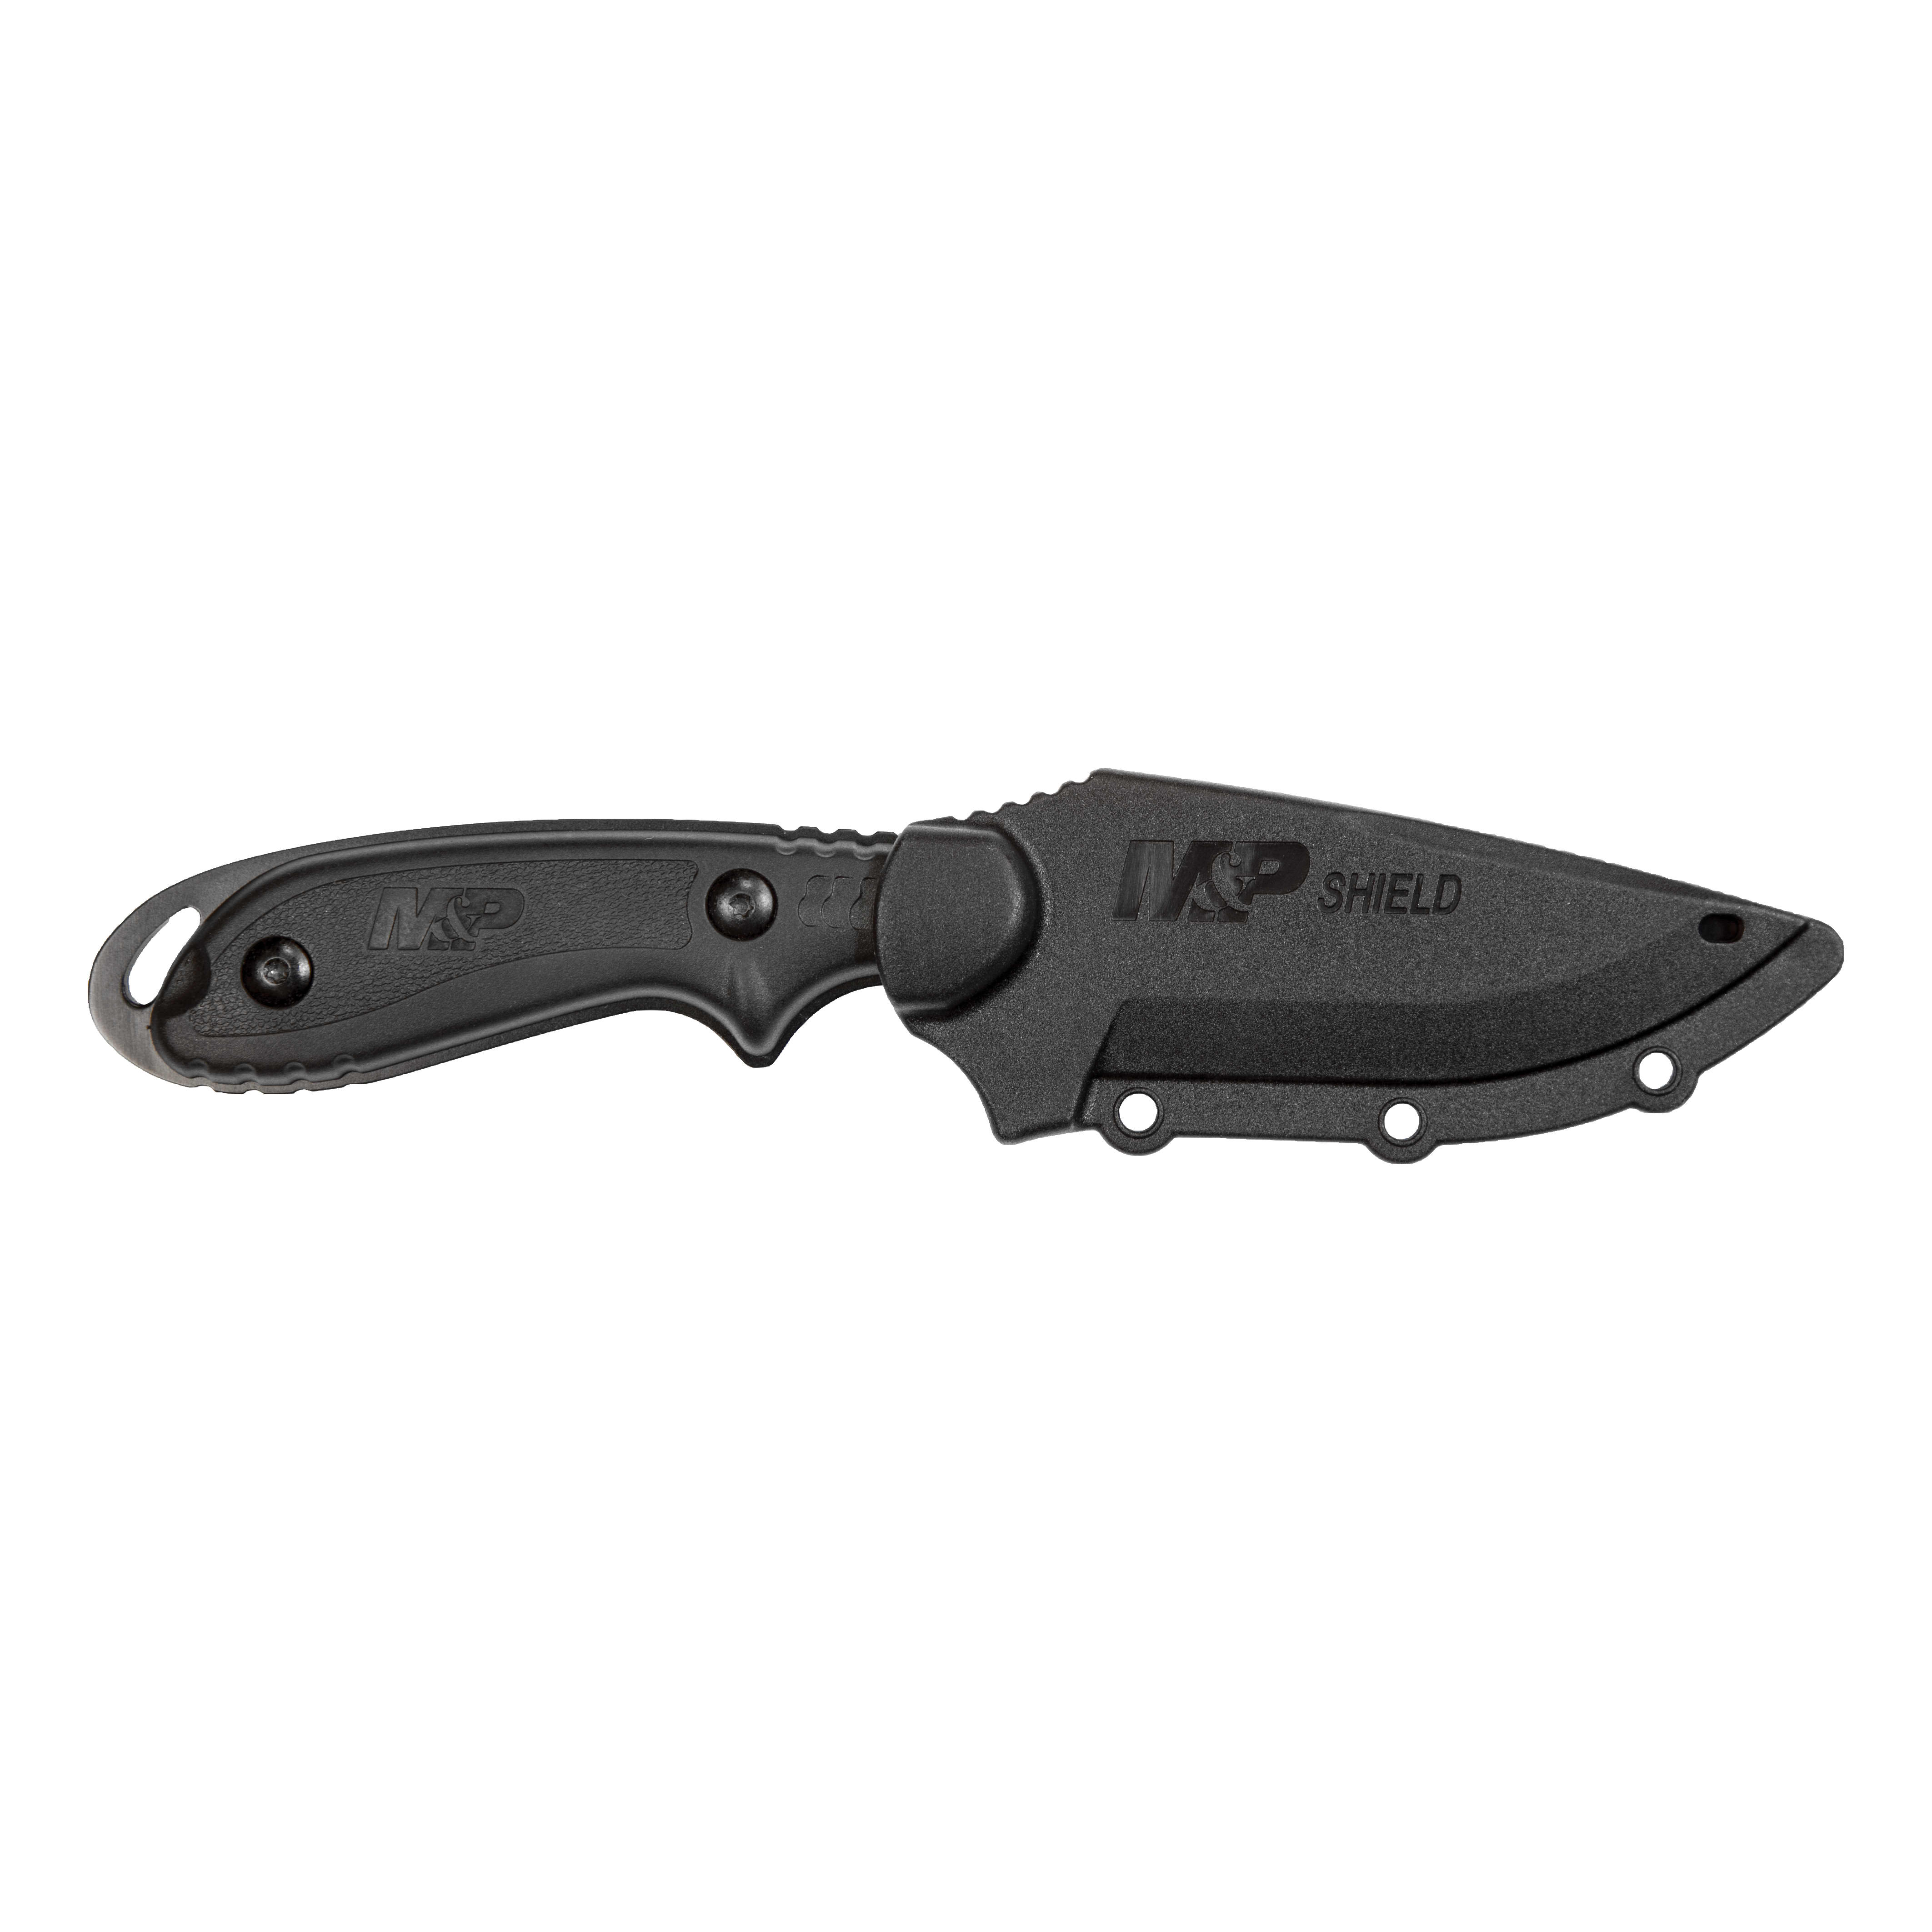 Smith & Wesson® M&P® Shield Fixed Blade Knife - In Sheath View